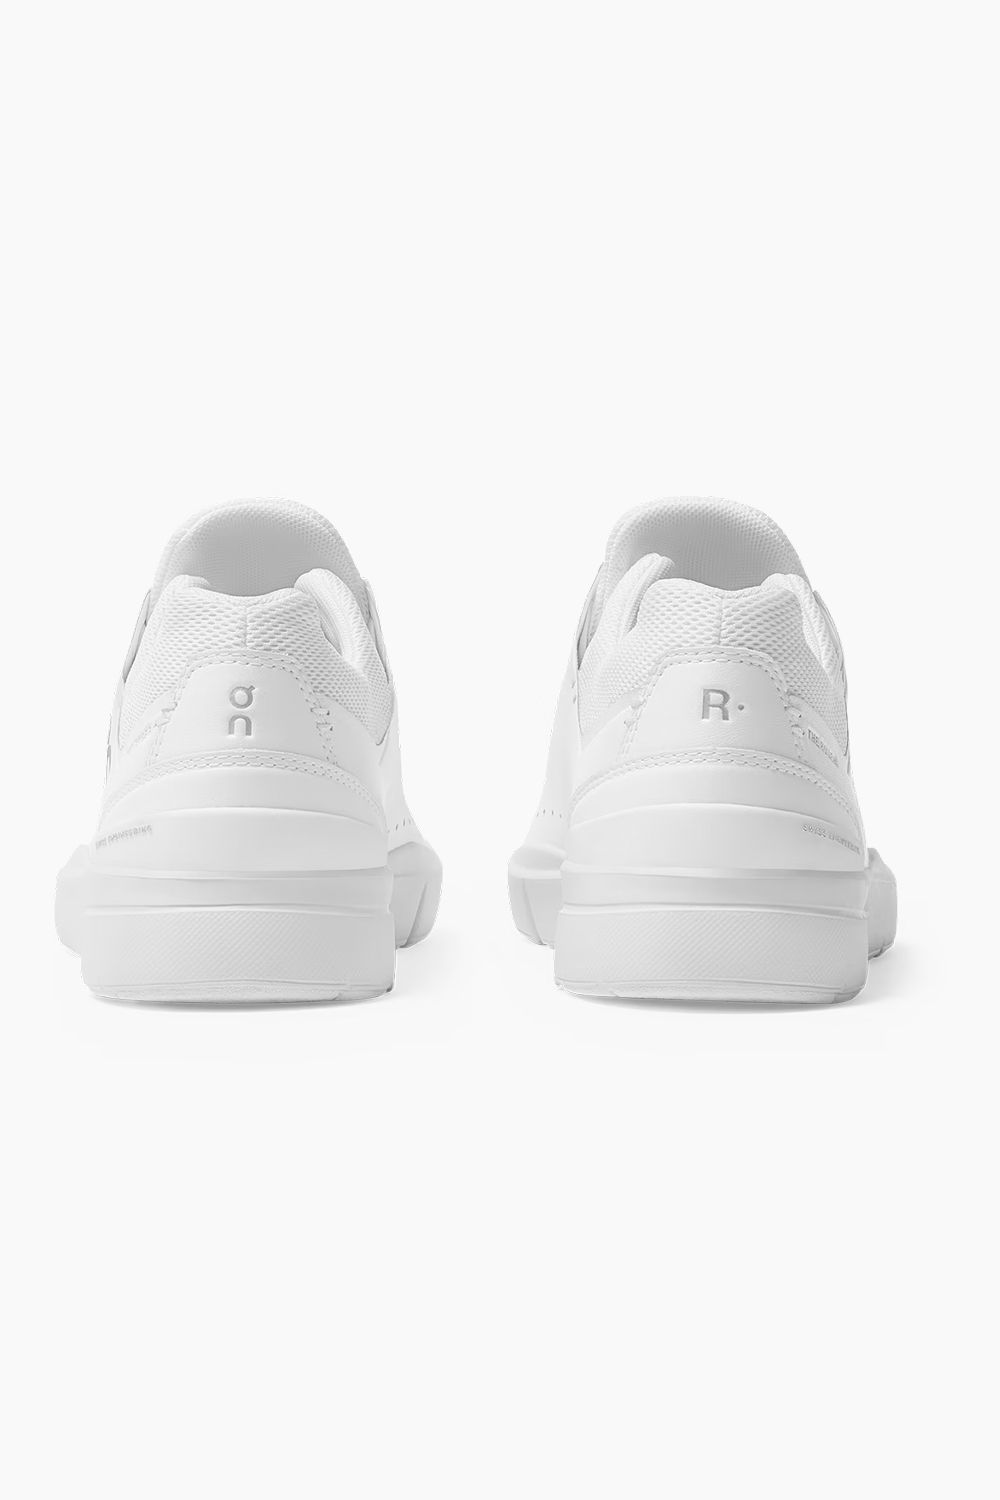 ON | Women's The Roger Advantage in All White